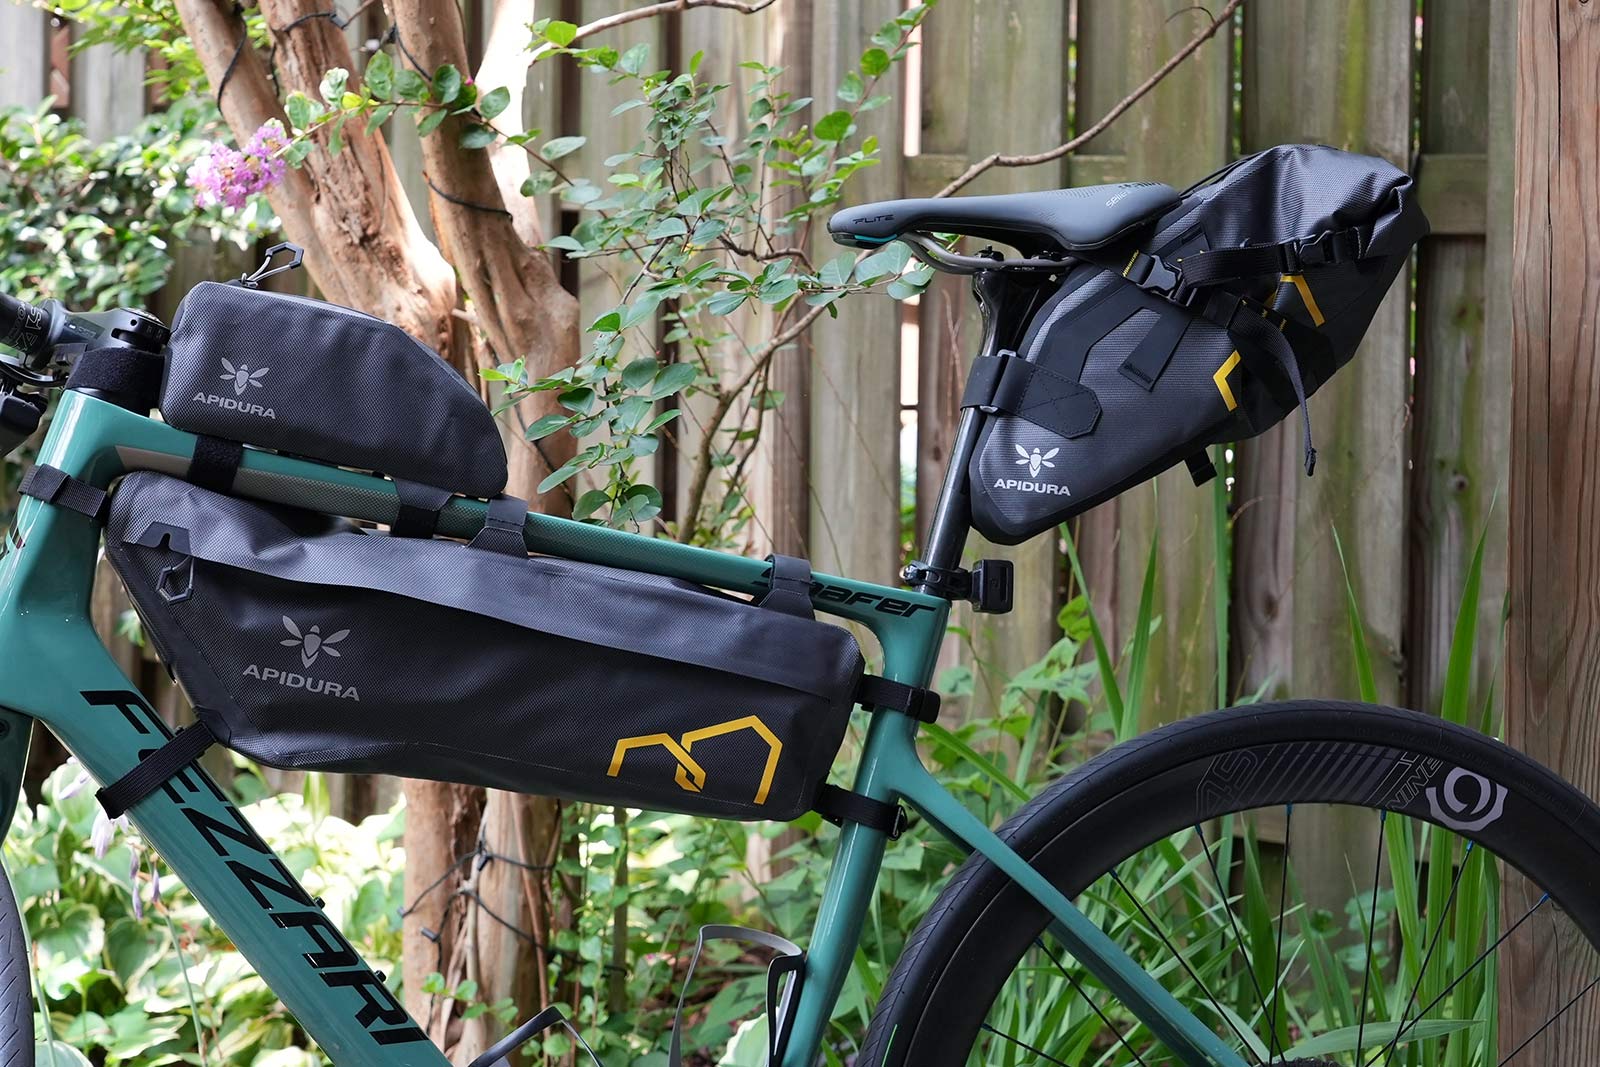 apidura expedition bikepacking bags installed on a gravel bike